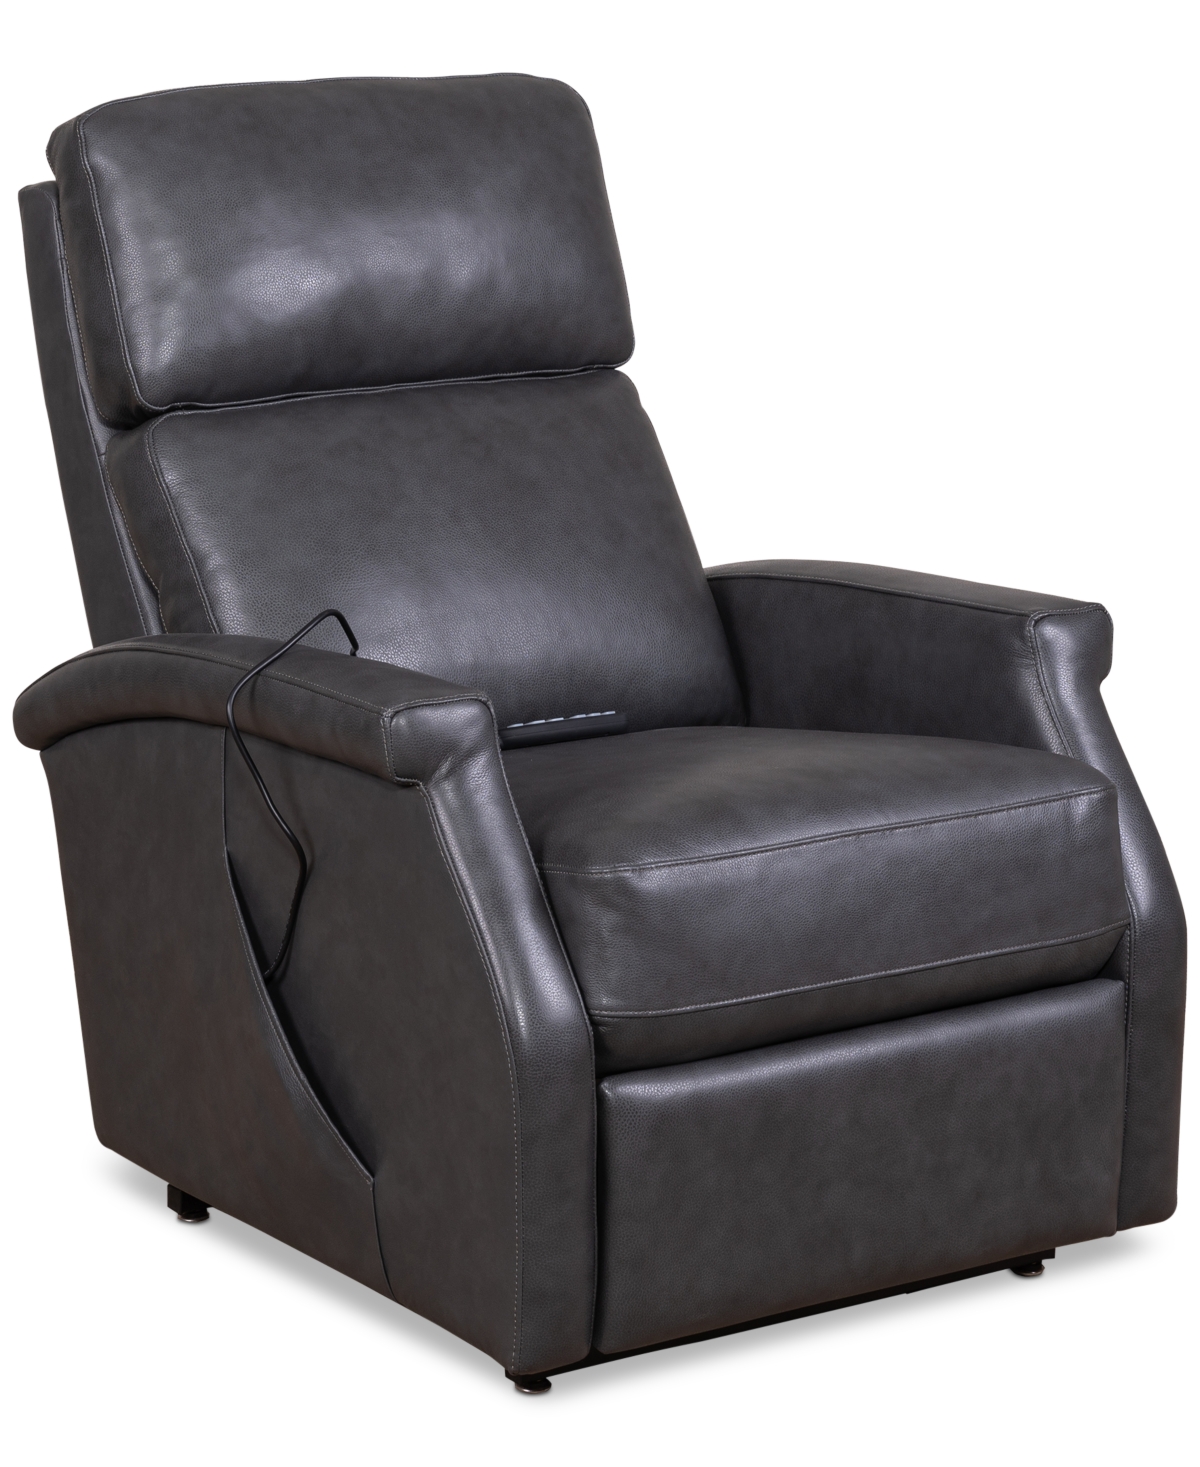 Furniture Cainsey Leather Power Lift Recliner, Created For Macy's In Grey